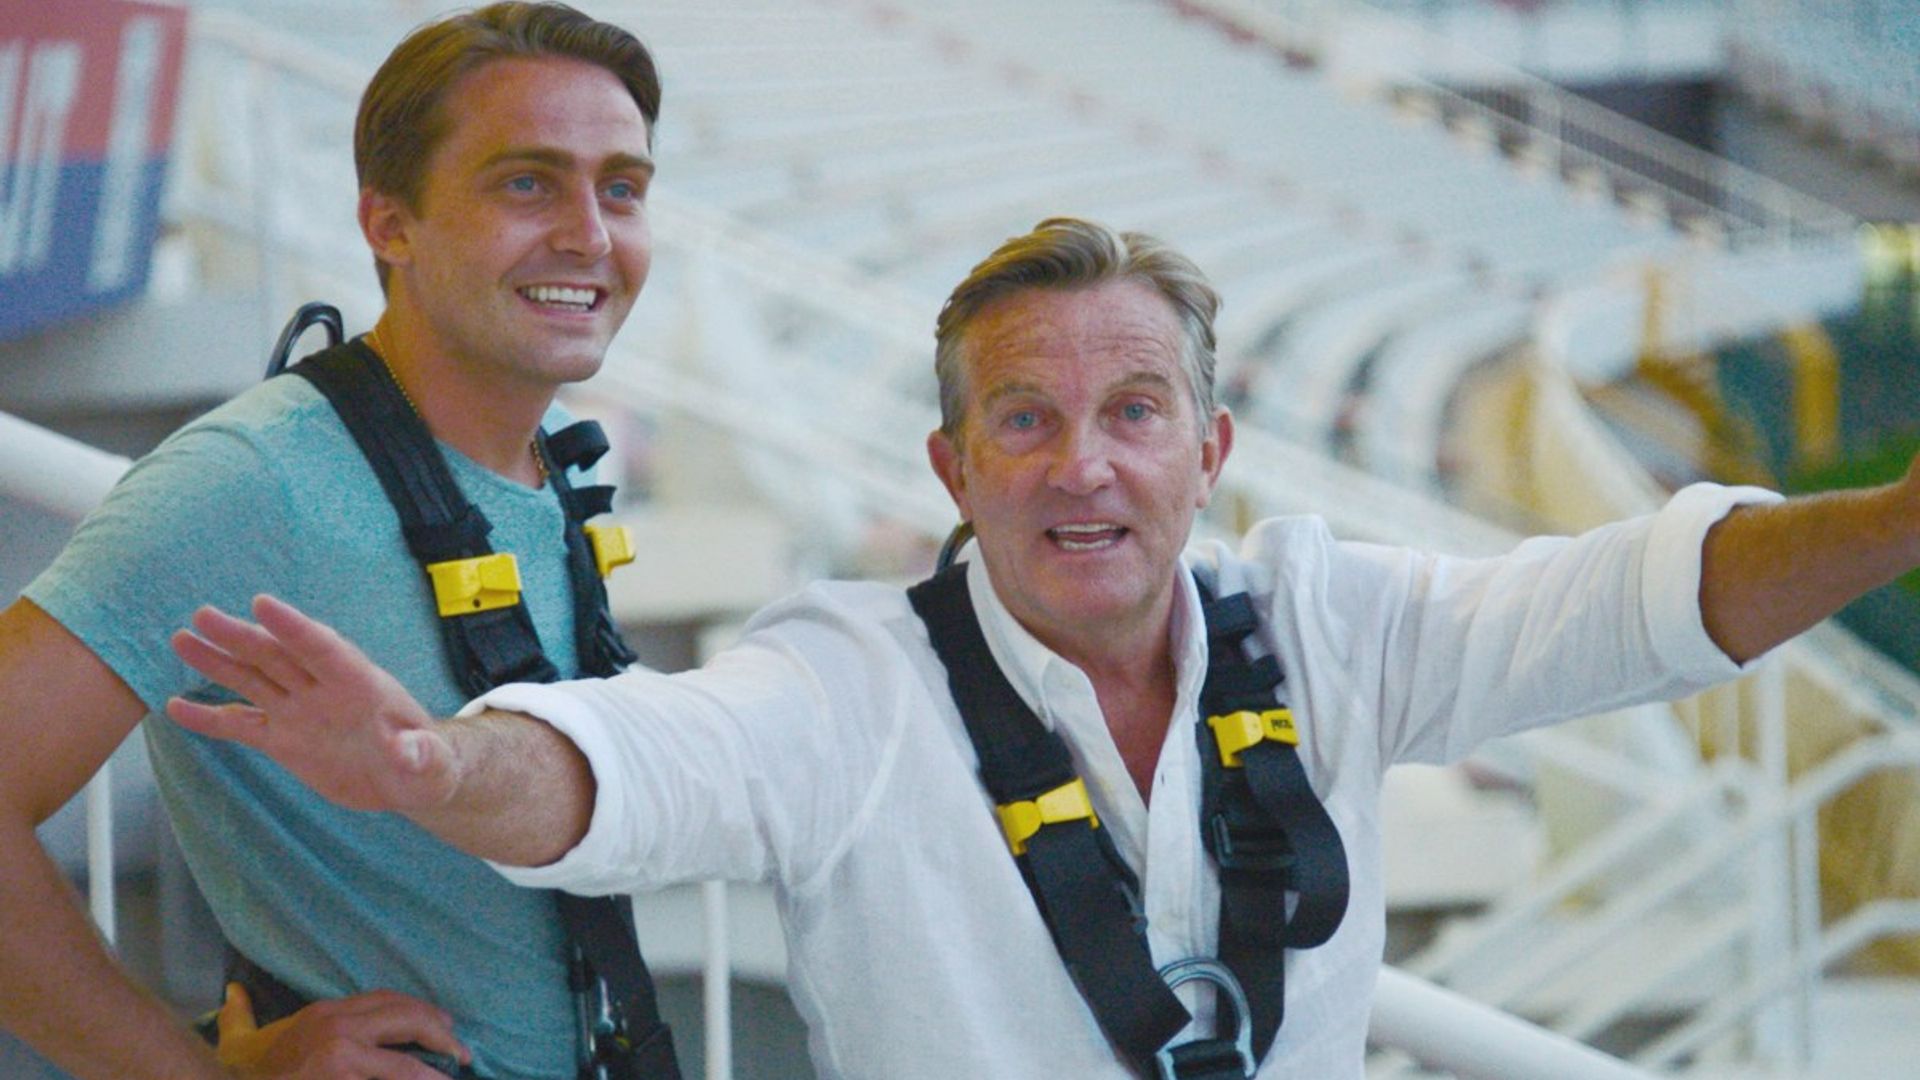 Bradley Walsh attempts daring escapology stunt in new series of Breaking Dad